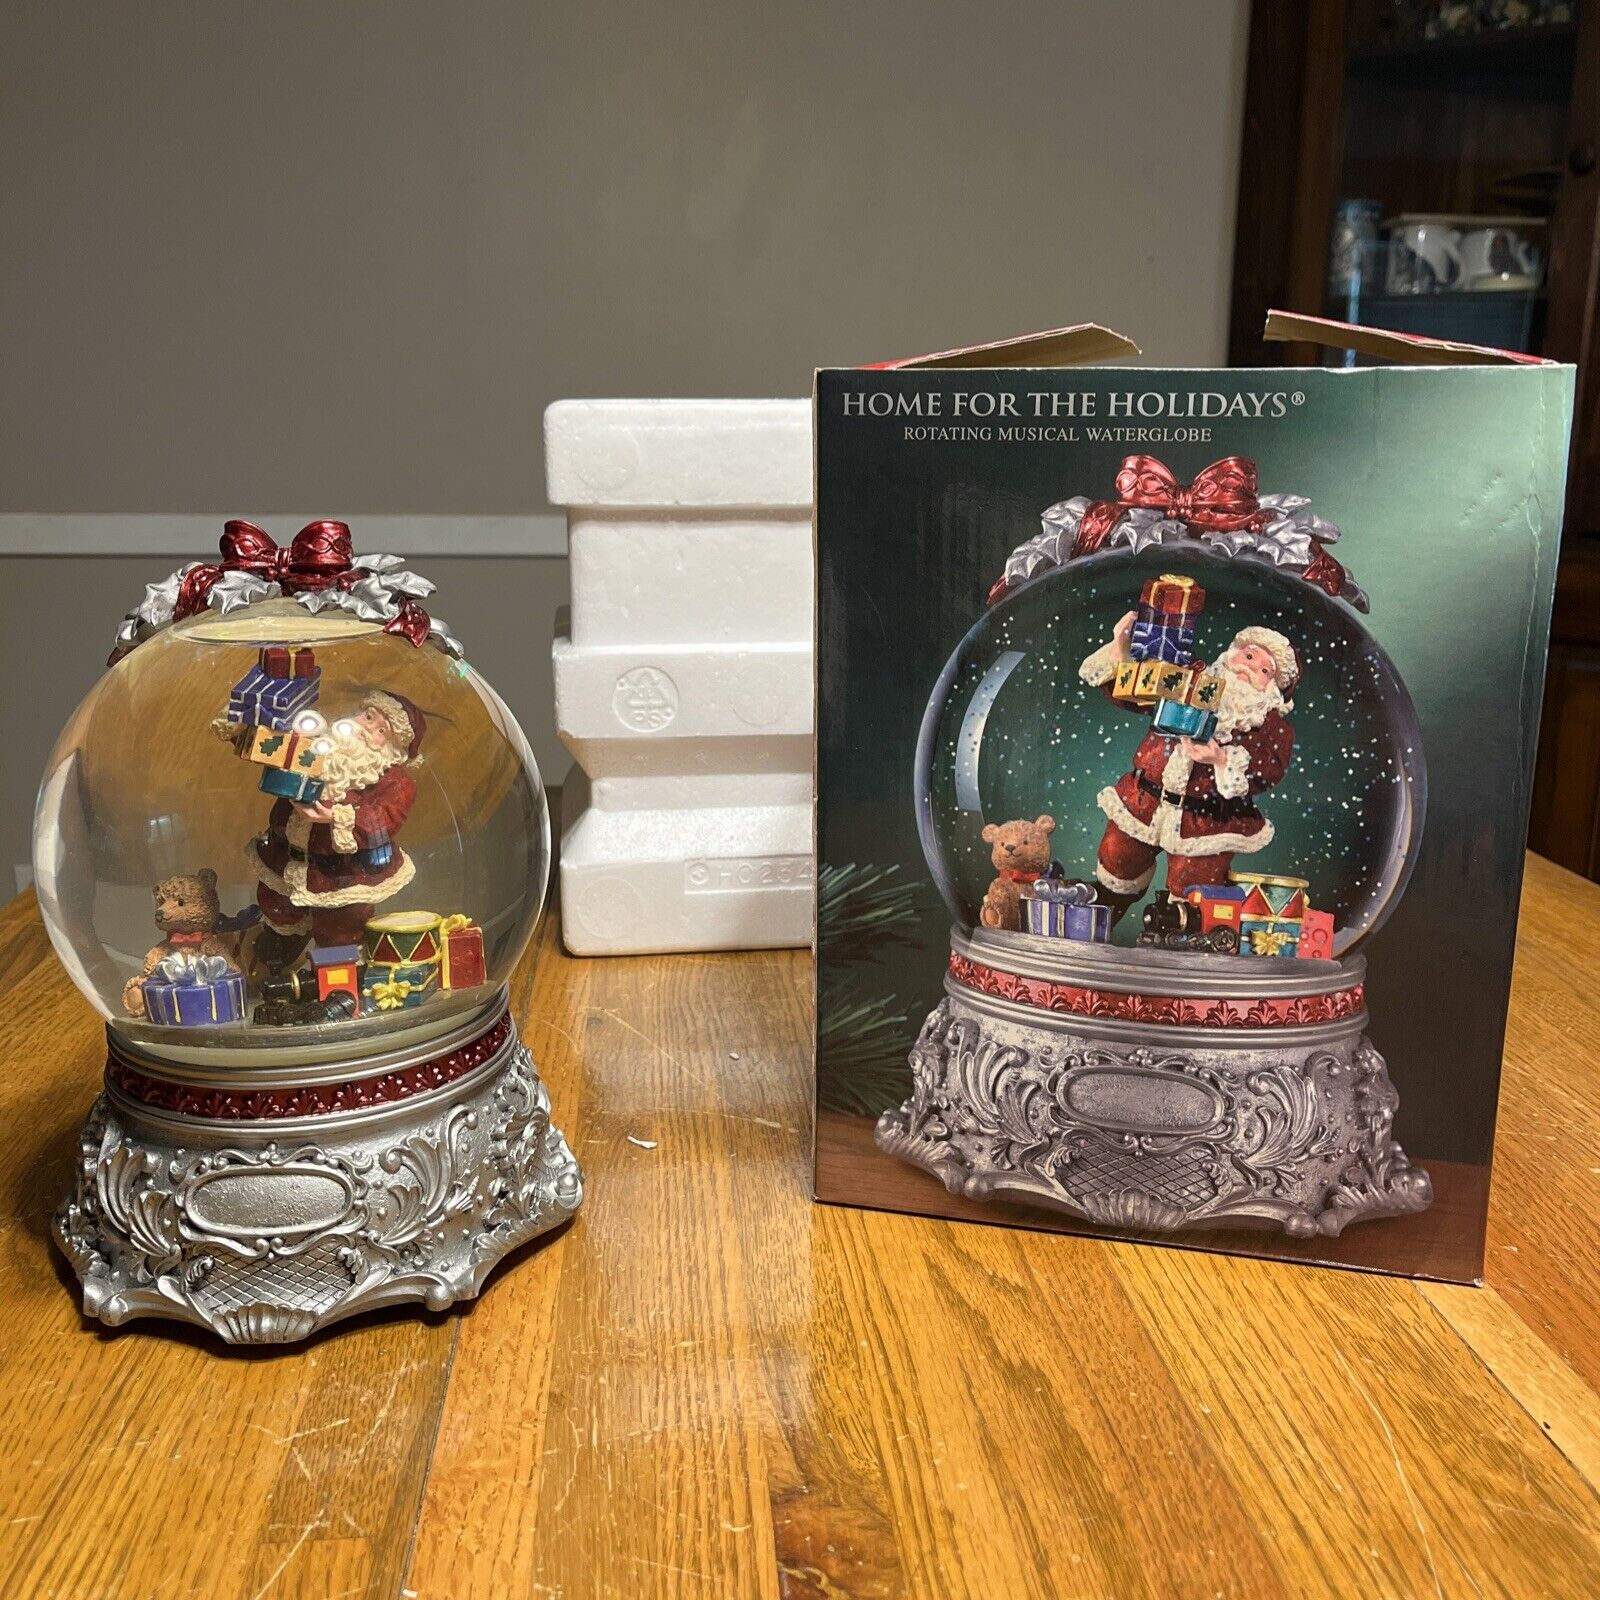 Home For The Holidays Rotating Musical Waterglobe